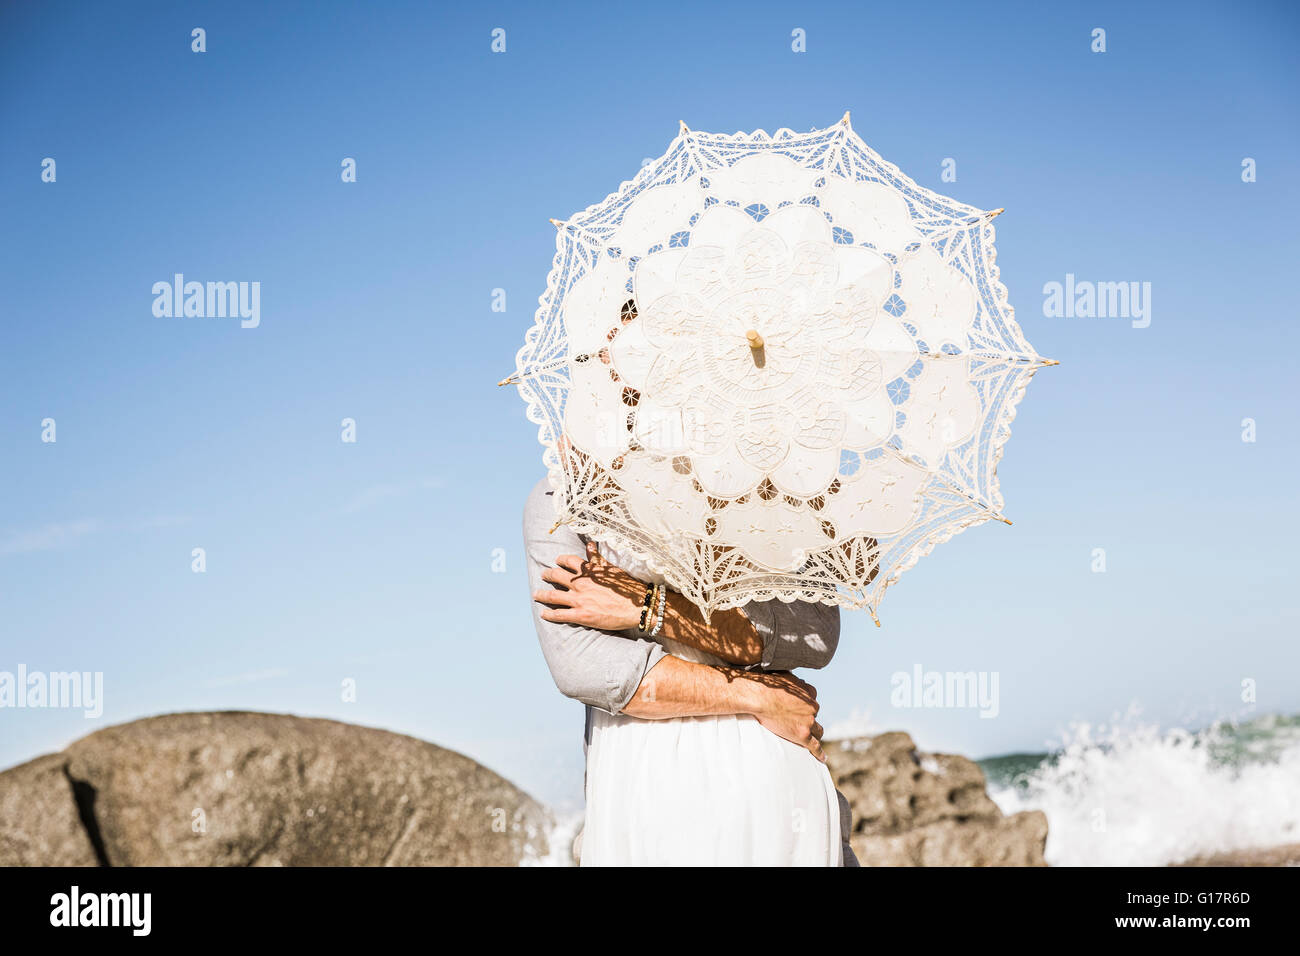 Couple on beach hugging obscured by lace umbrella Stock Photo